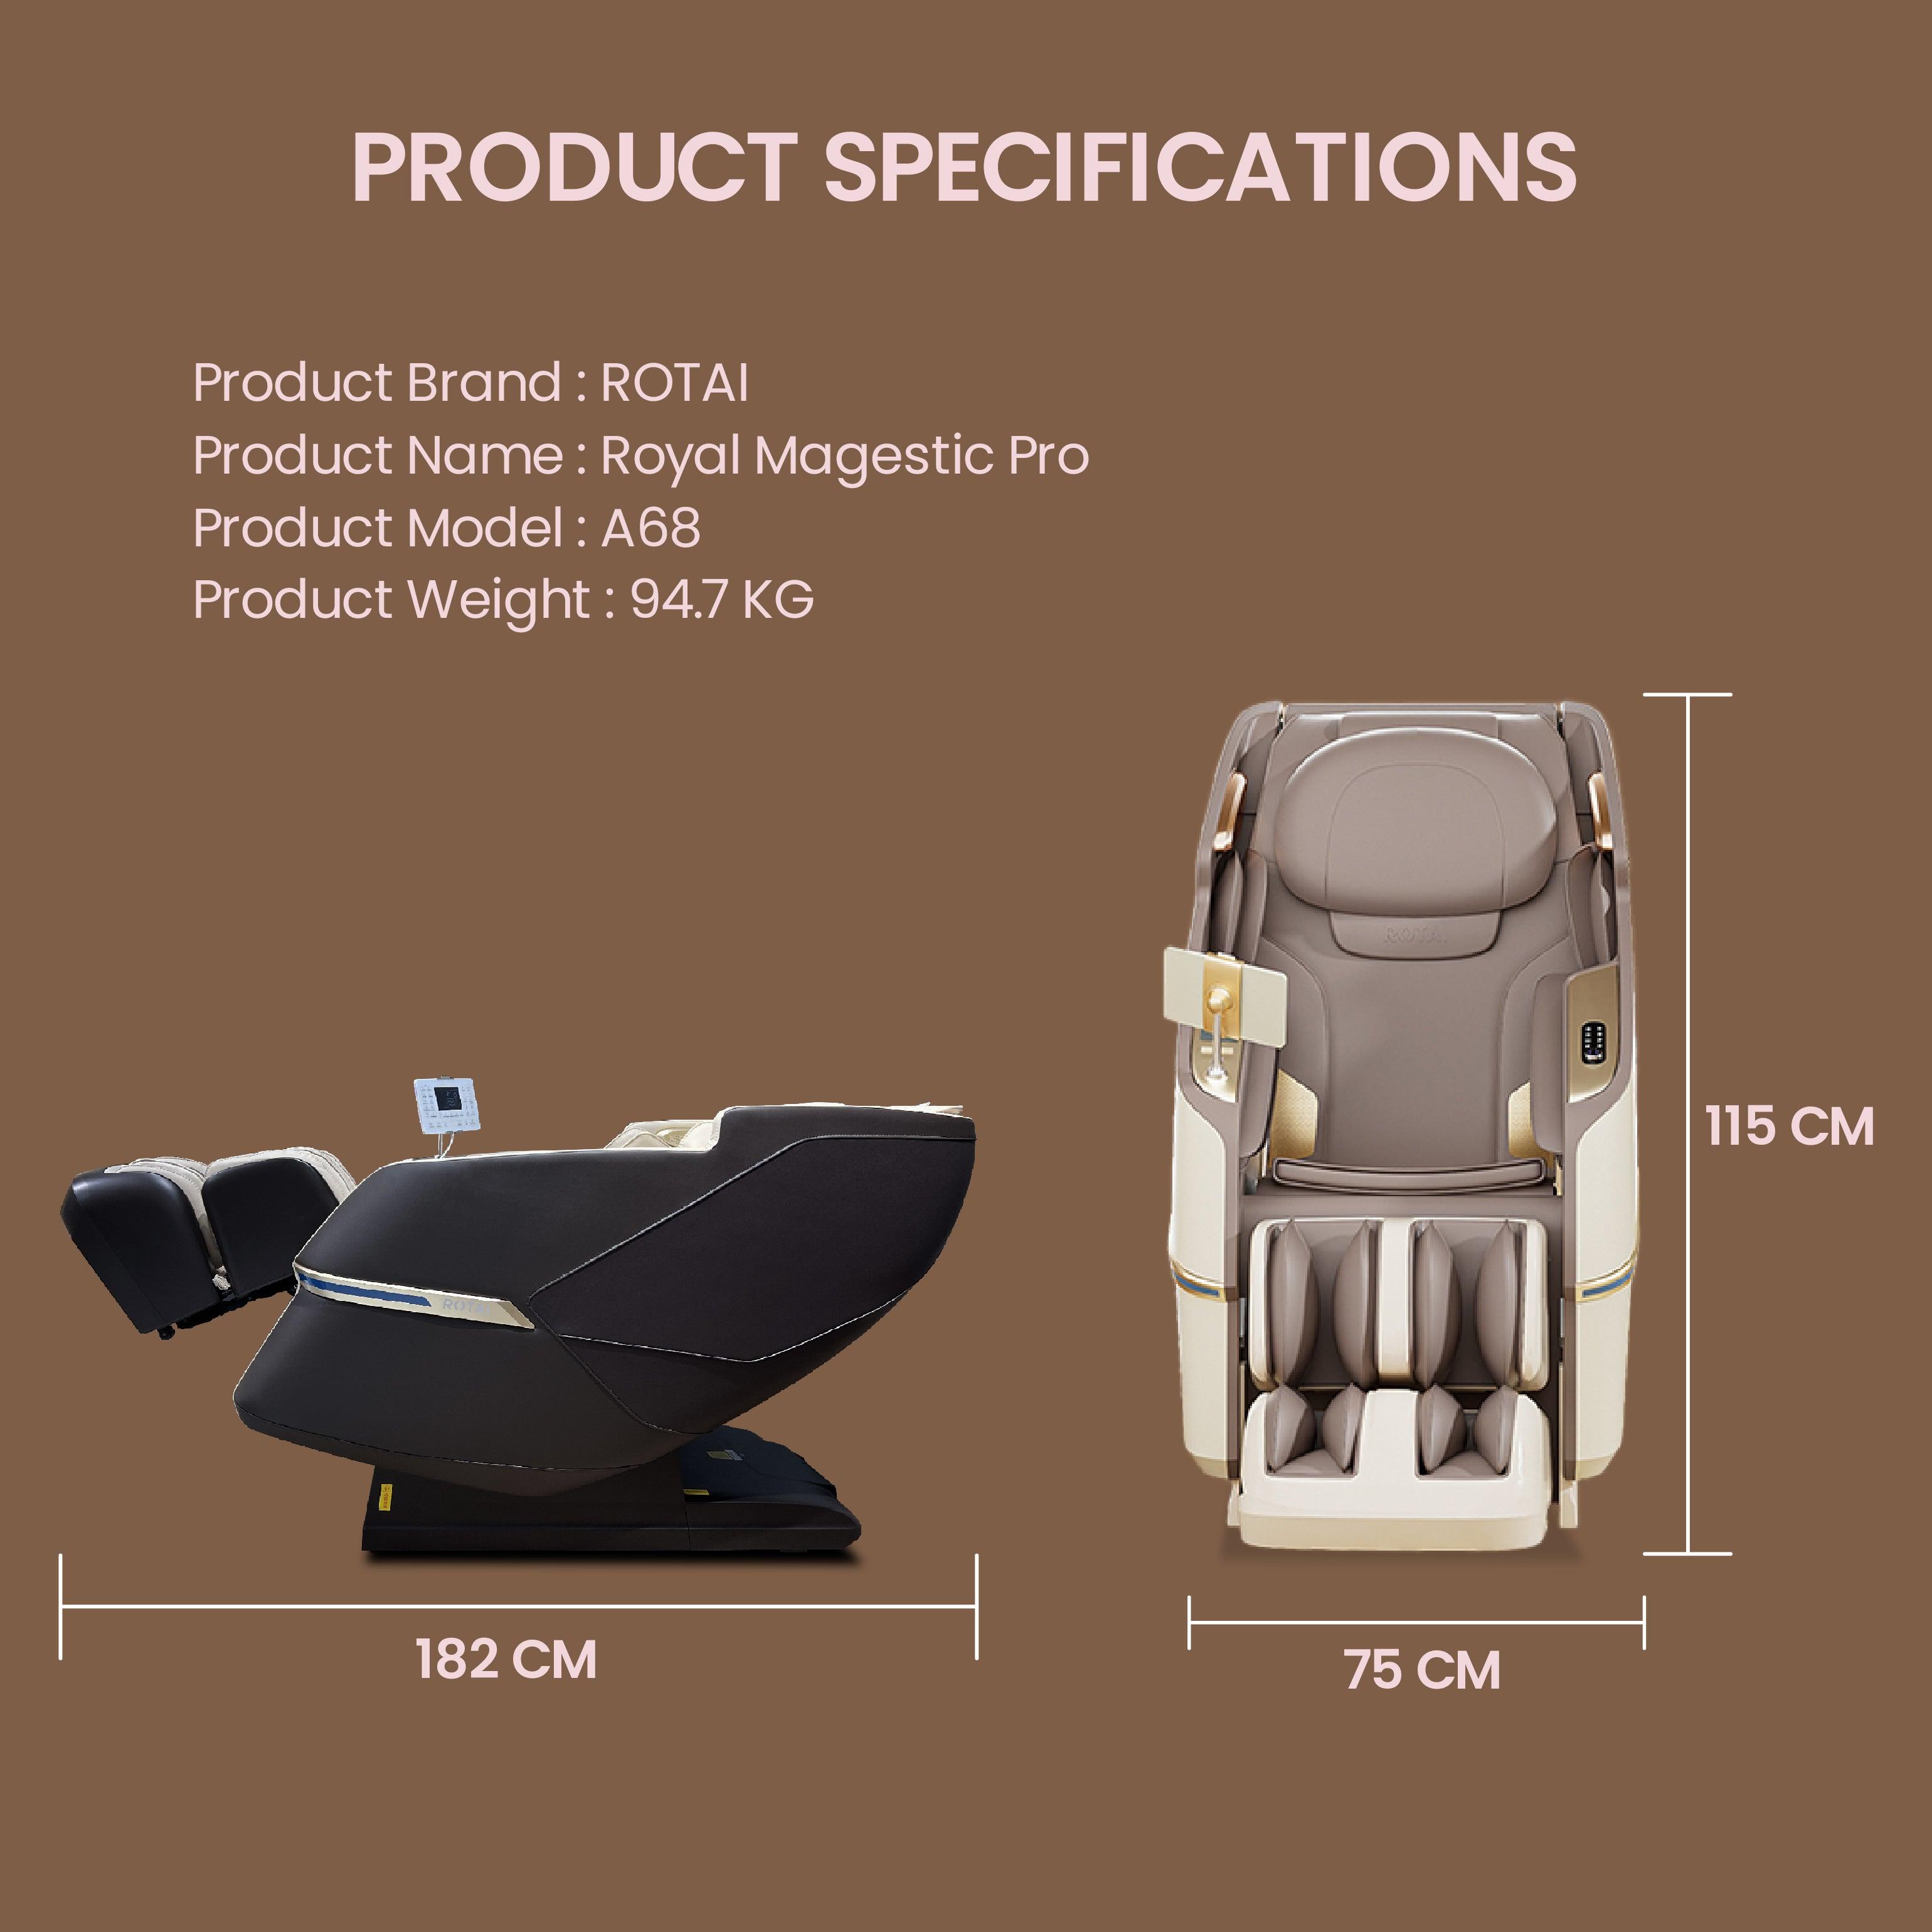 Royal Magestic Pro Massage Chair dimensions and specifications including product brand, model, weight, and size.